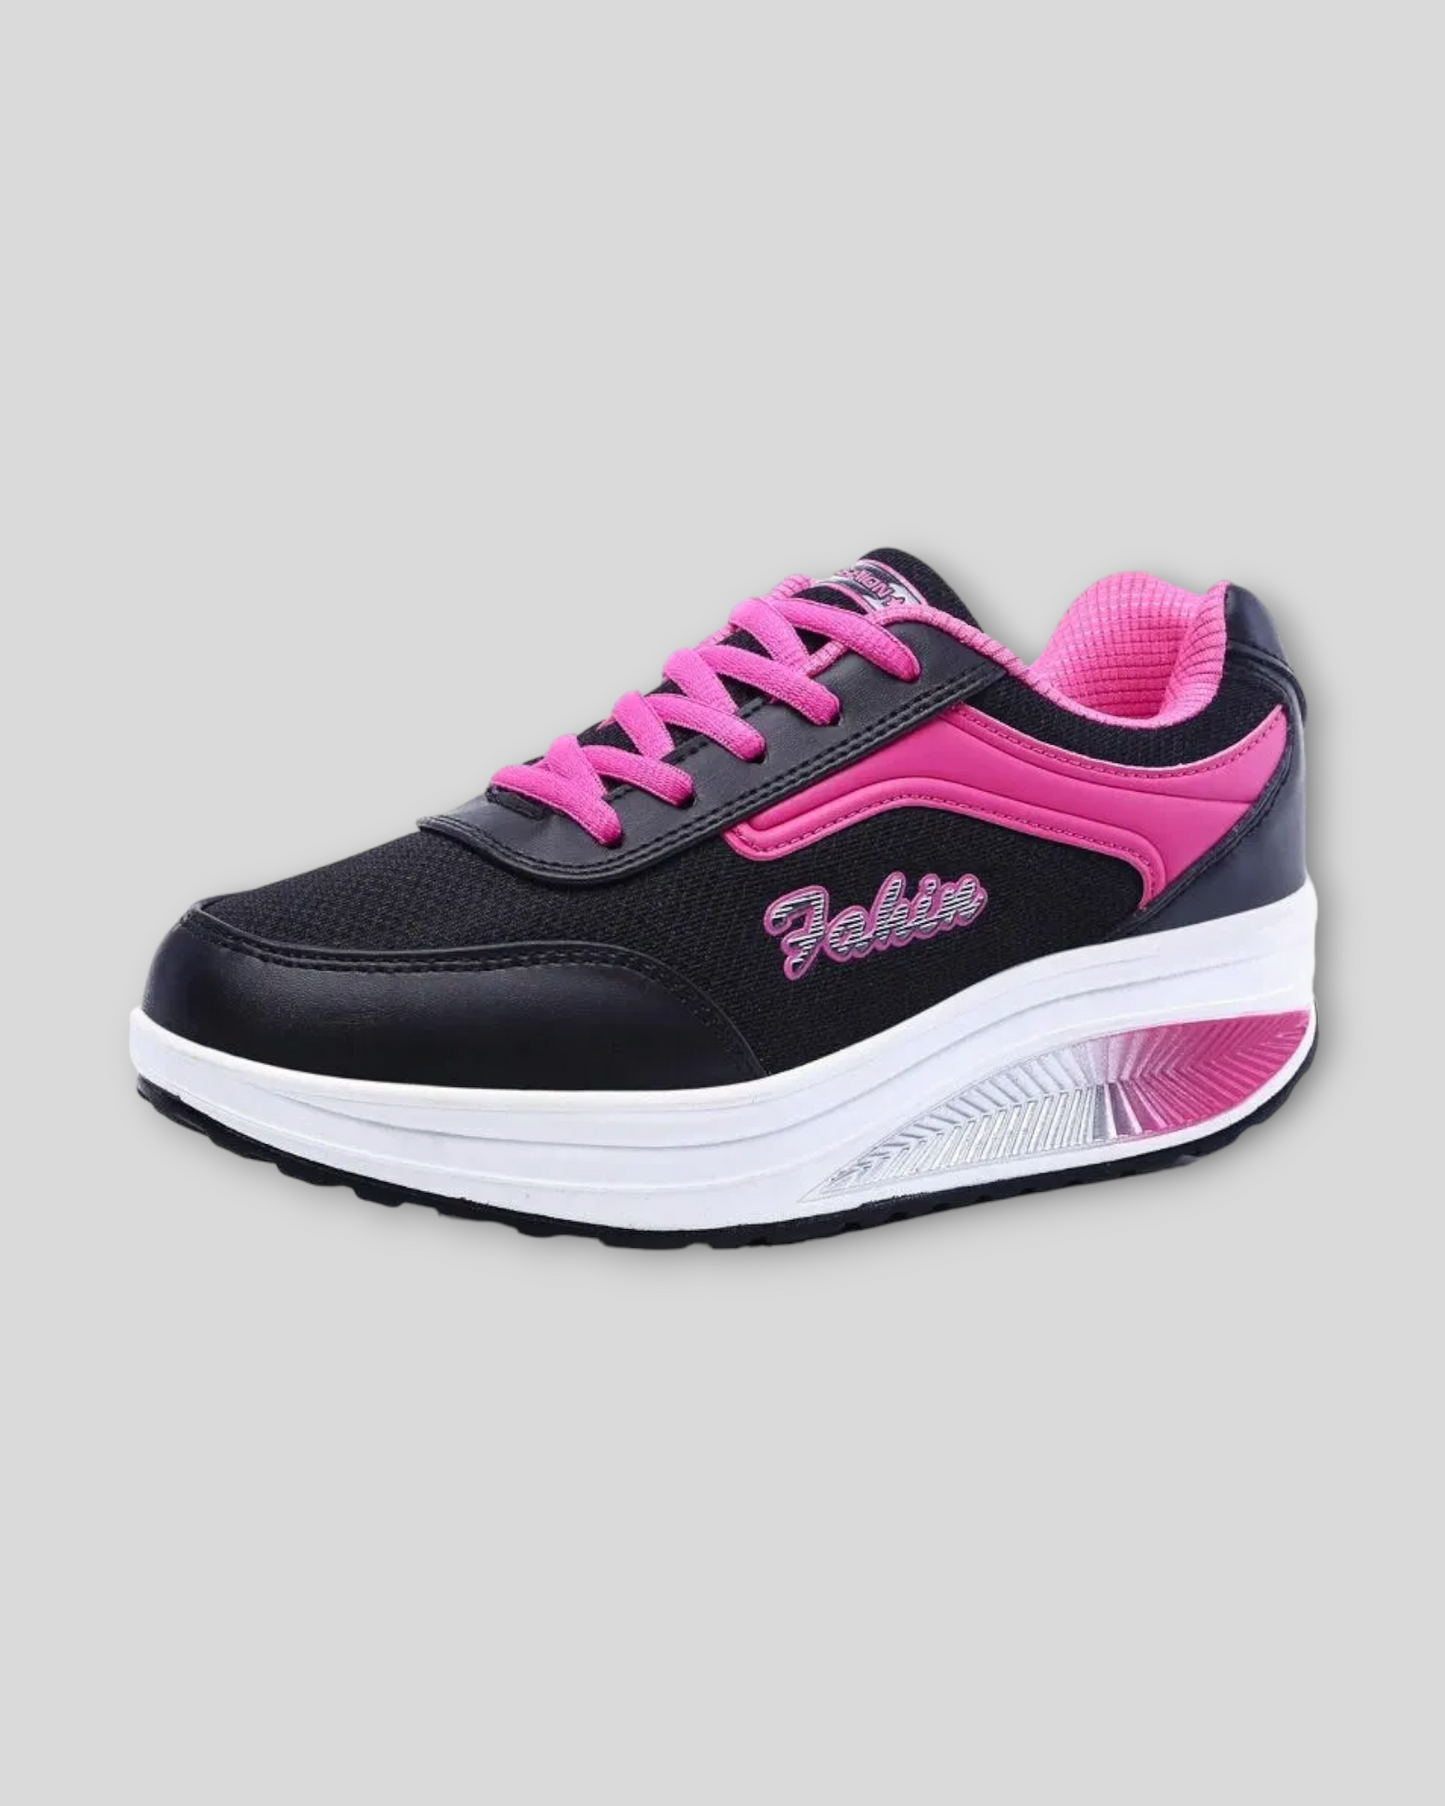 Women's Blue Workout Sneakers/ Trainers/ Shoes